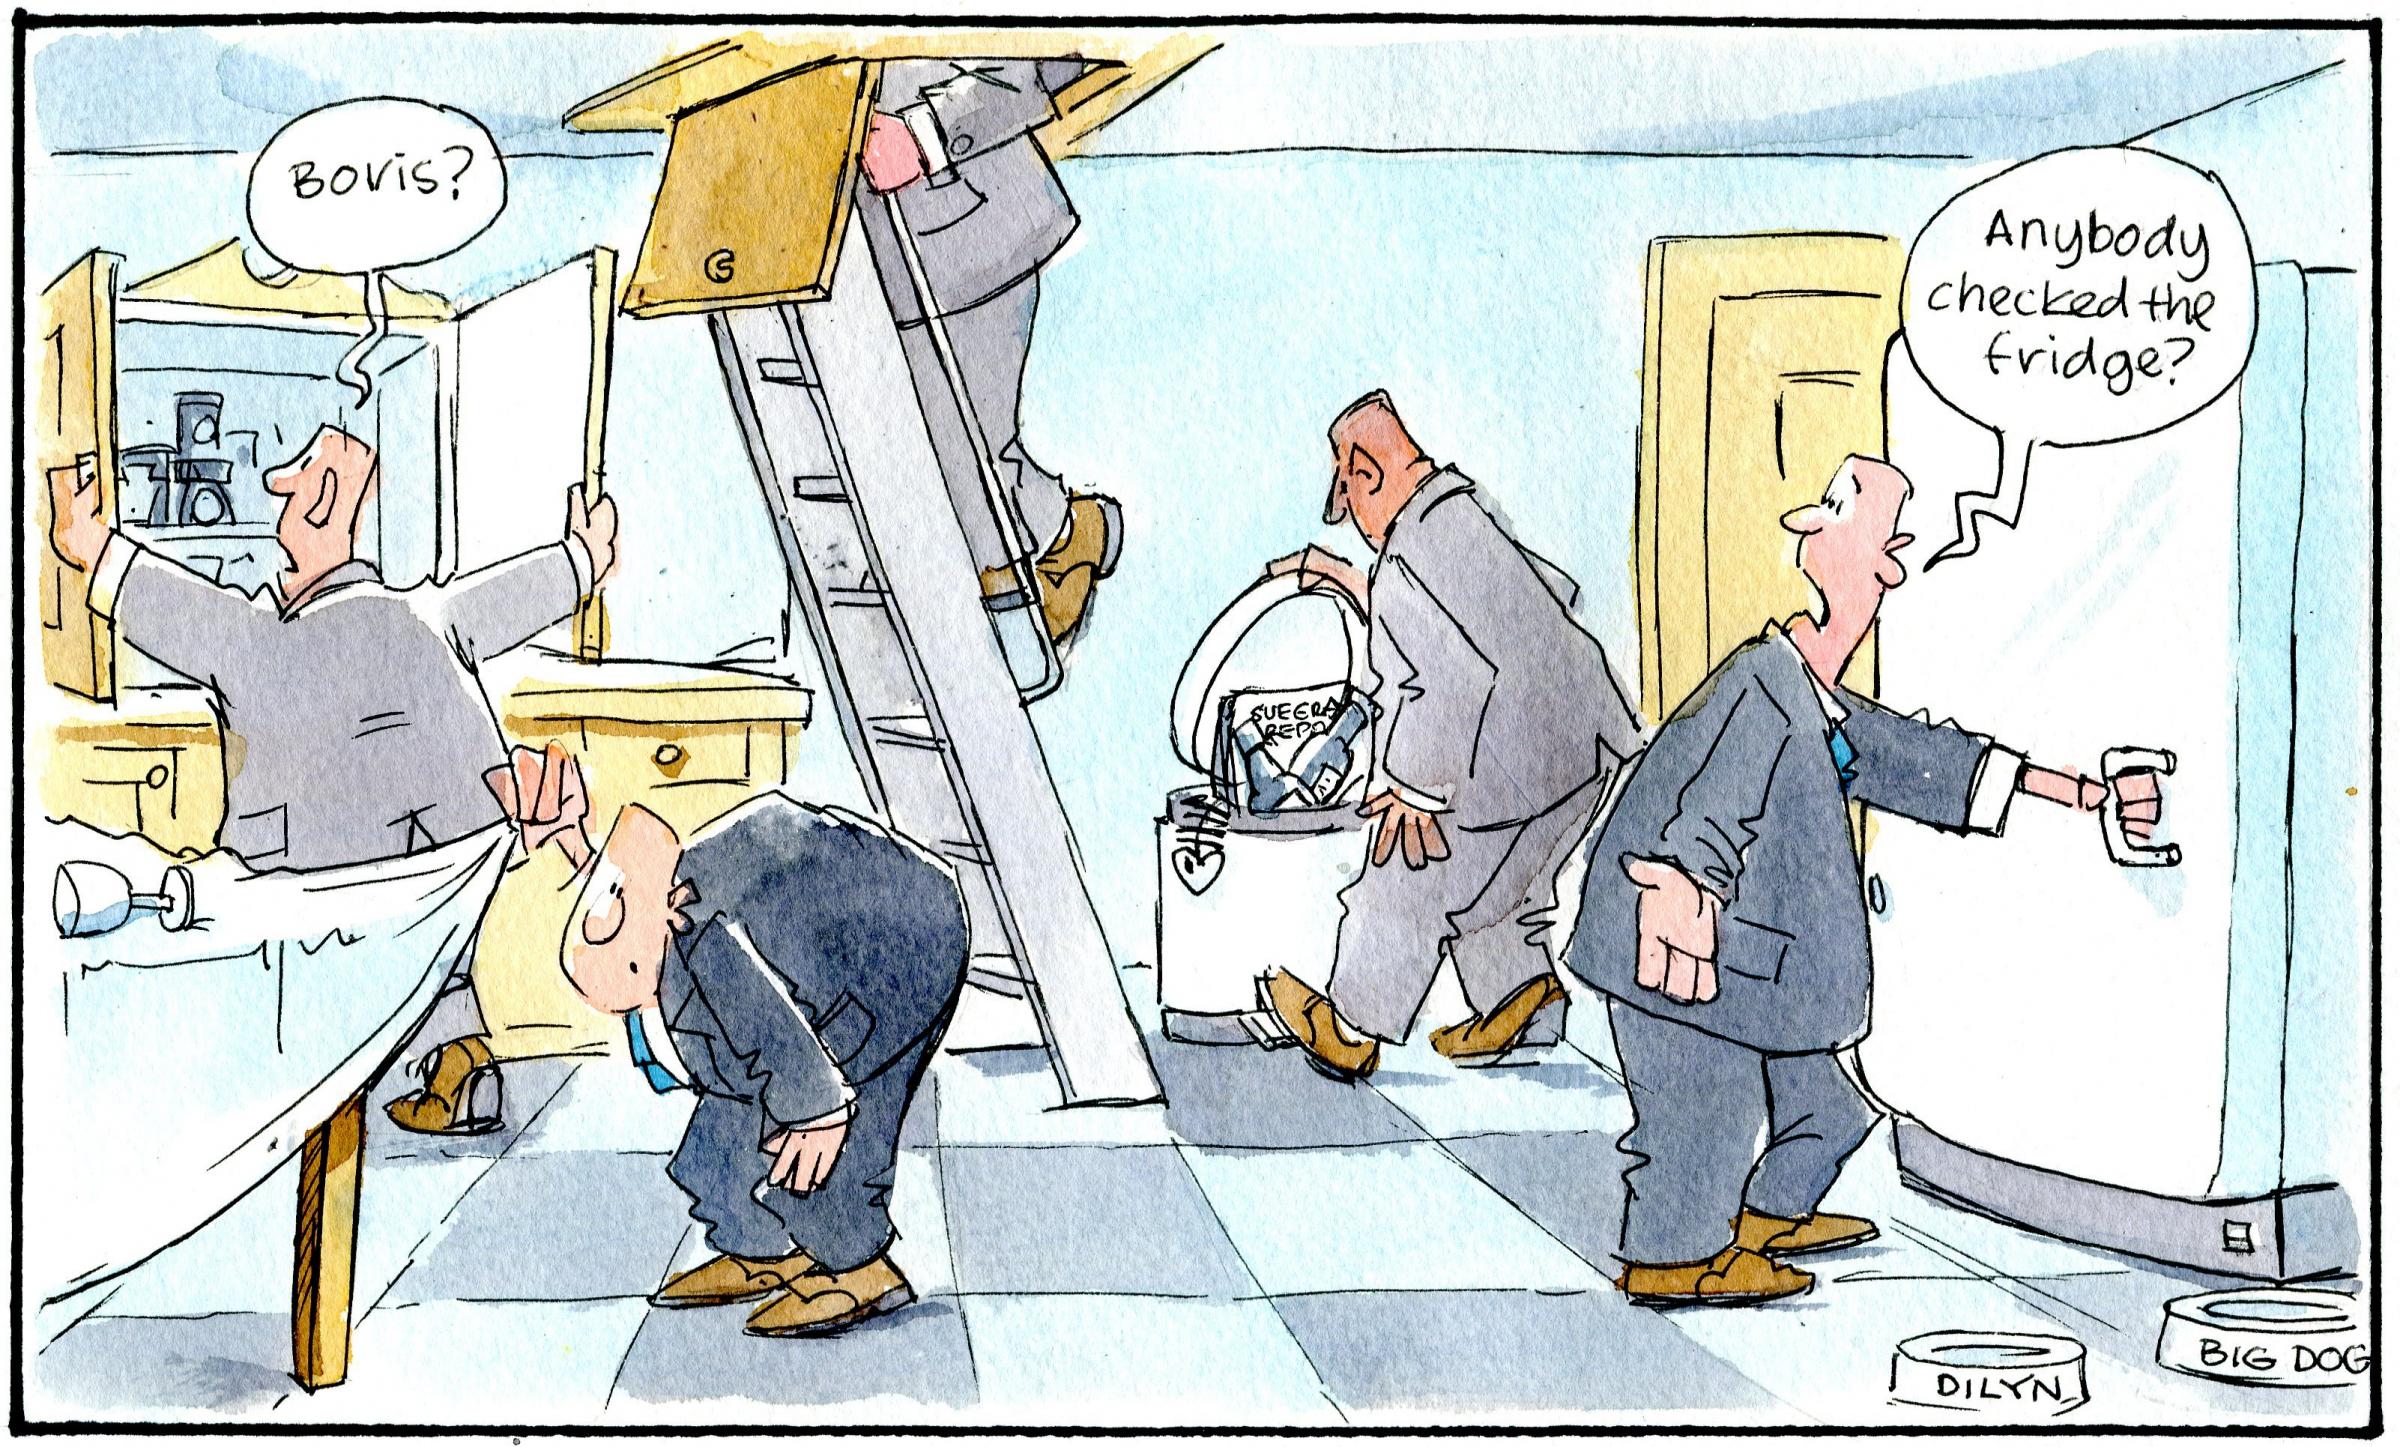 Our cartoonist Steven Camley’s take on defiant Boris